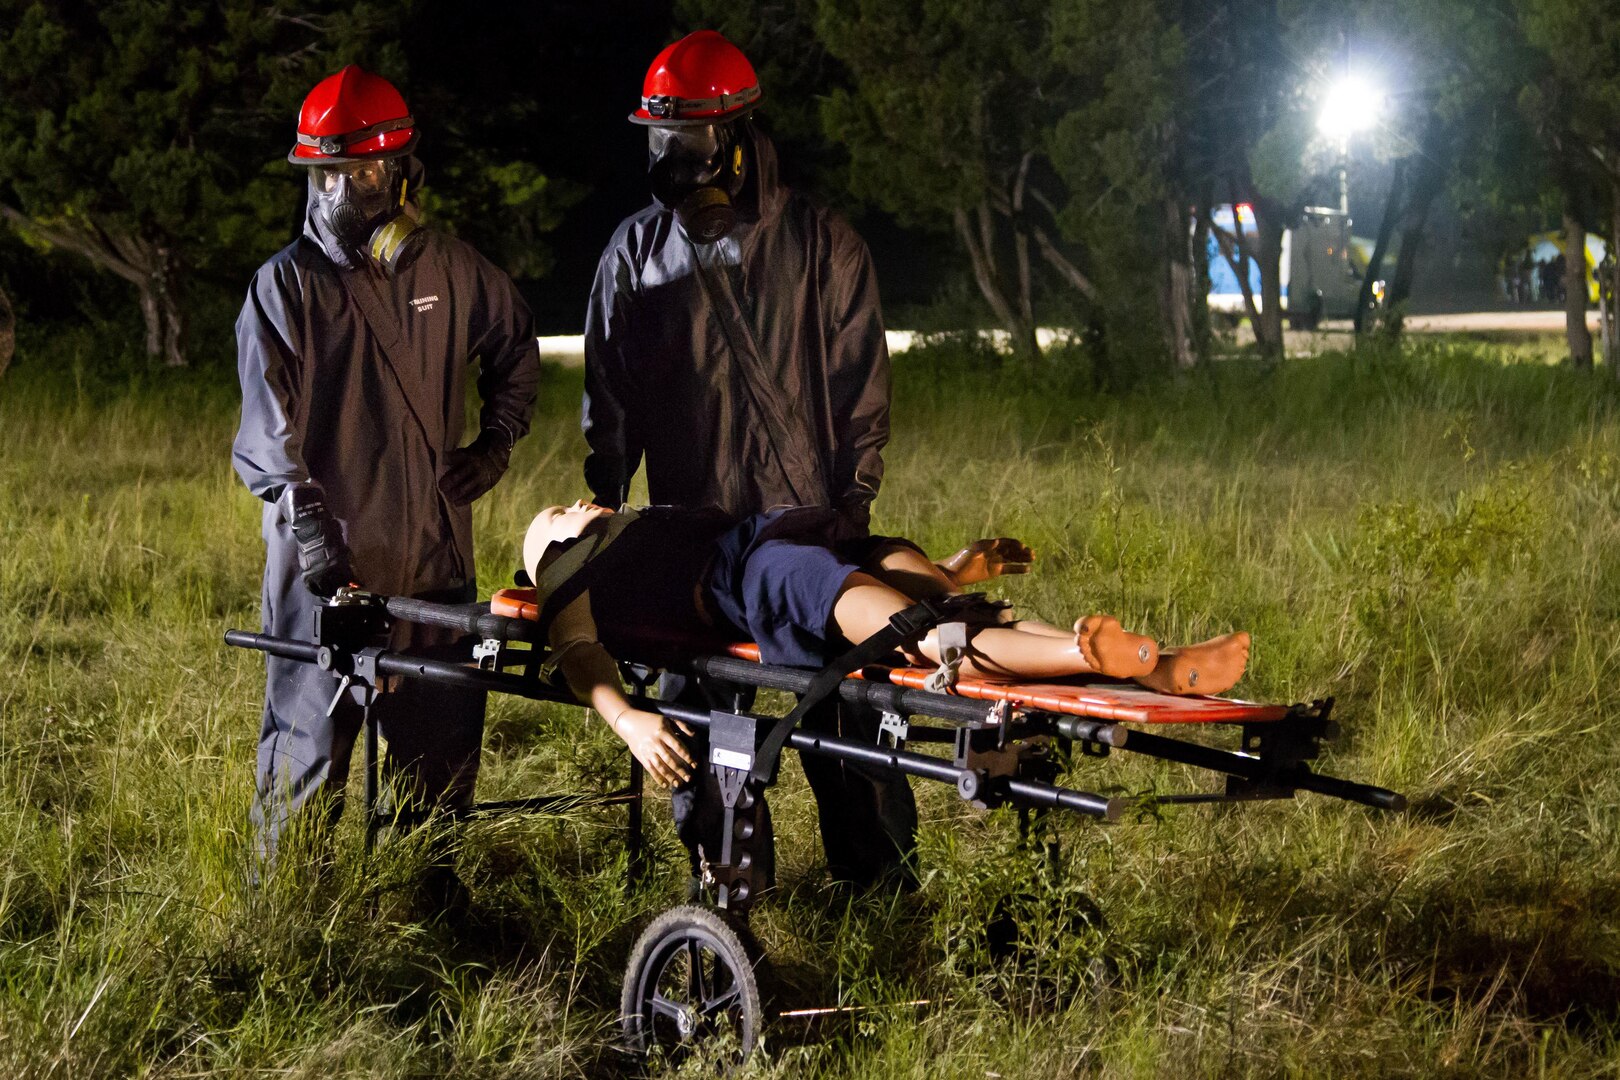 Soldiers with the 172nd Hazard Response Company from Fort Riley, Kansas carry a patient to a decontamination site Aug. 25, 2016 at Fort Hood, Texas during Exercise Sudden Response 16. The weeklong exercise was a key training event for the 172nd HR Co. and various other units within Joint Task Force Civil Support, a rapidly deployable force of more than 5,000 service members from across the country who are specially trained and equipped to provide life-saving assistance in the event of chemical, biological, radiological or nuclear disasters in the U.S. (U.S. Army photo by Sgt. Marcus Floyd, 13th Public Affairs Detachment)